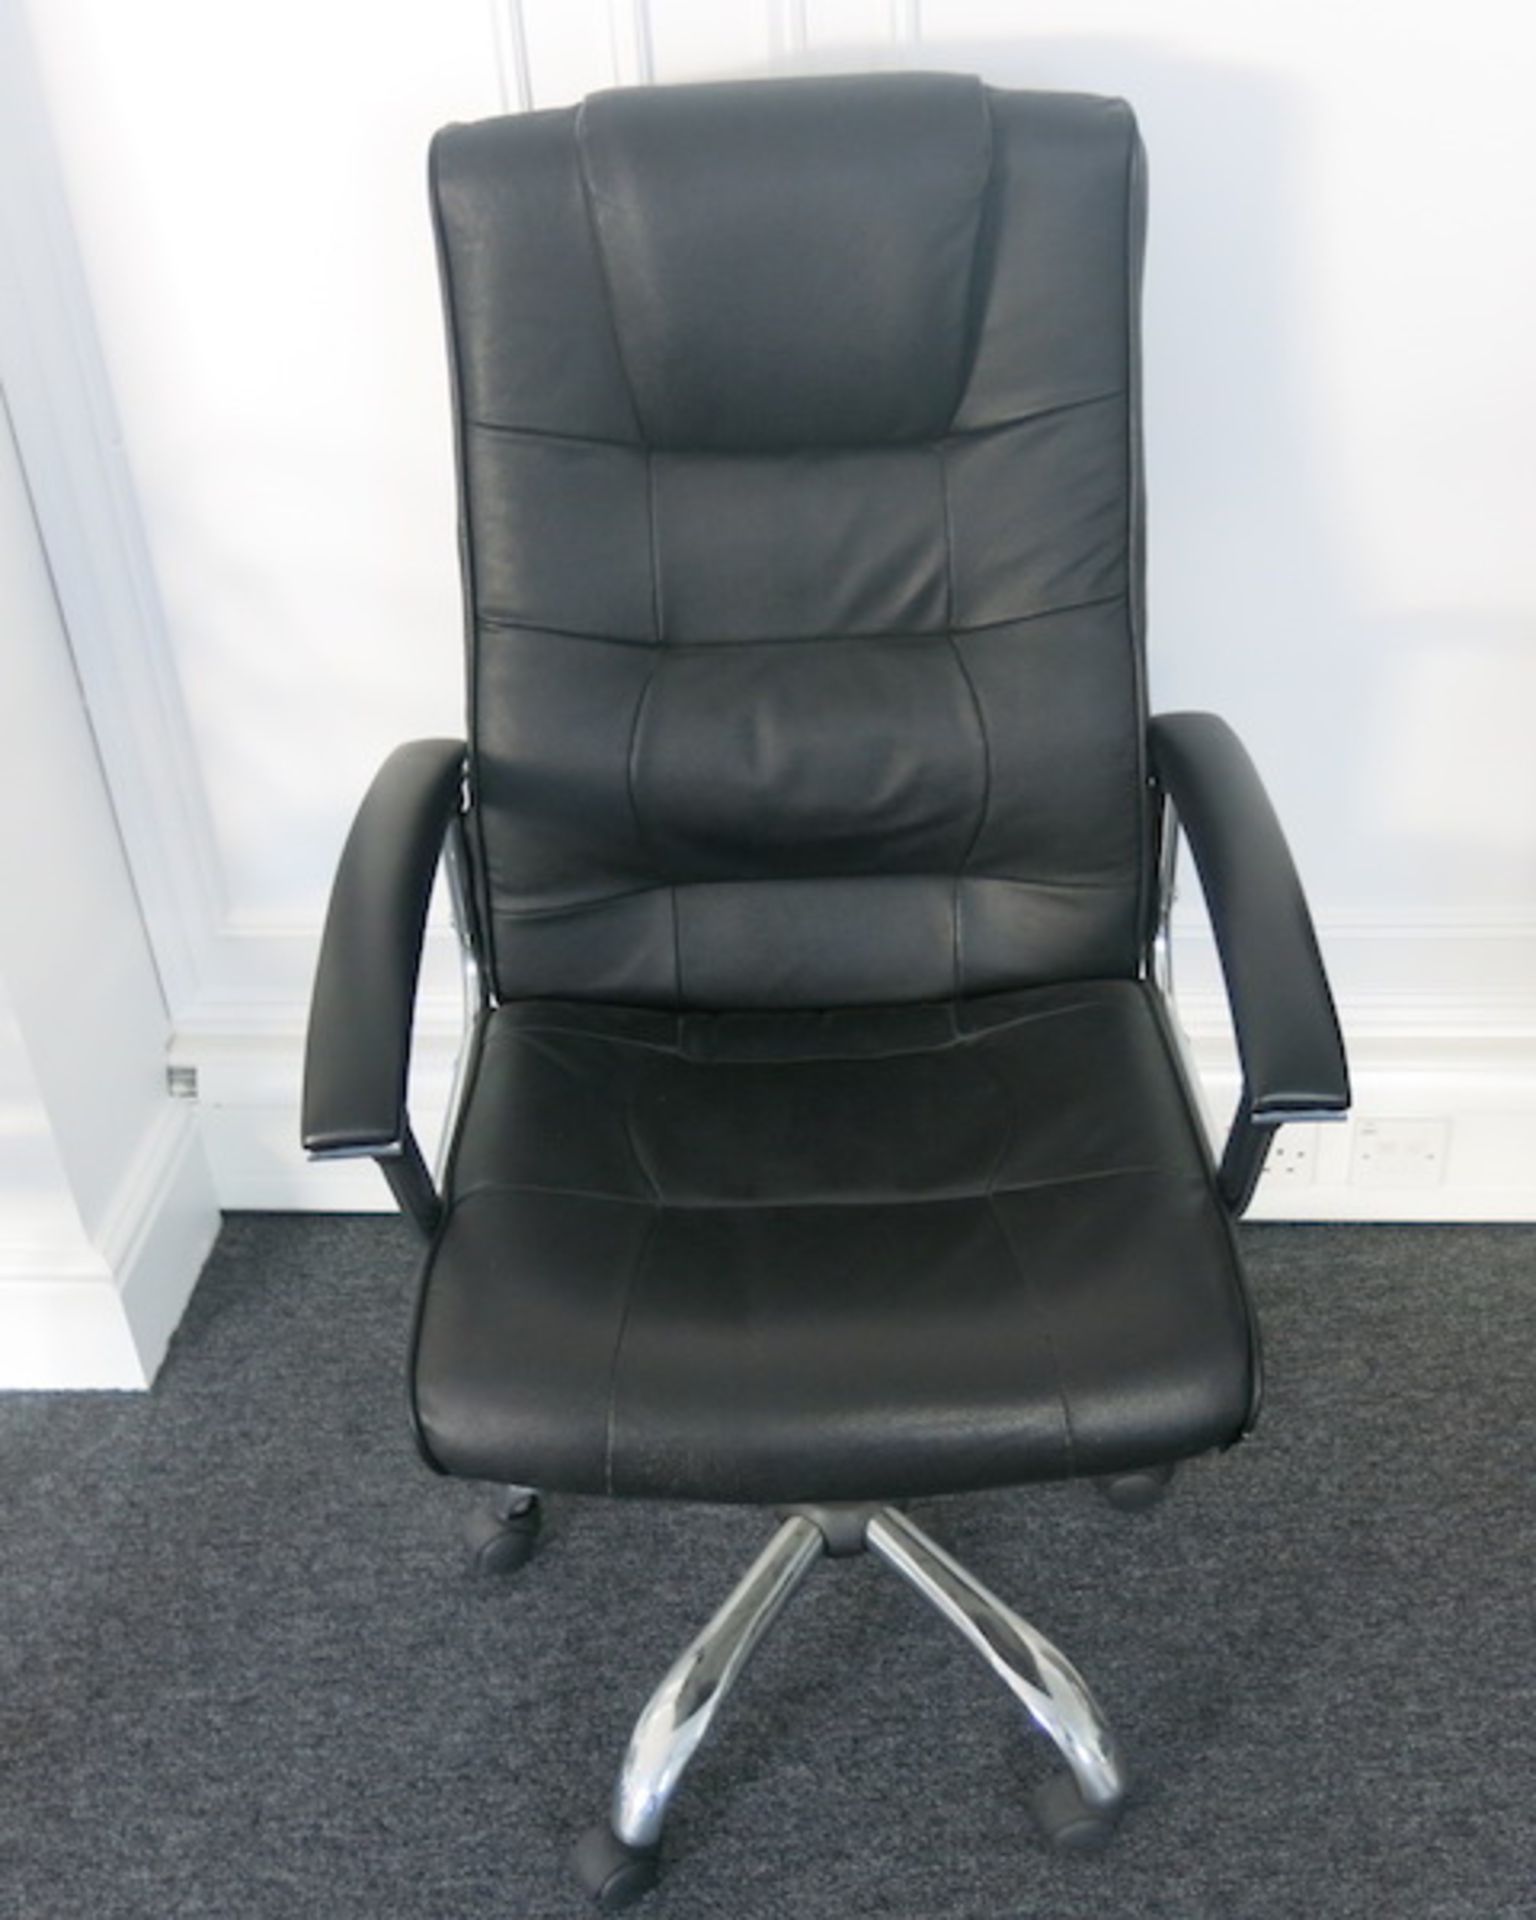 3 x Black Faux Leather Executive Office Swivel Chairs - Image 2 of 4